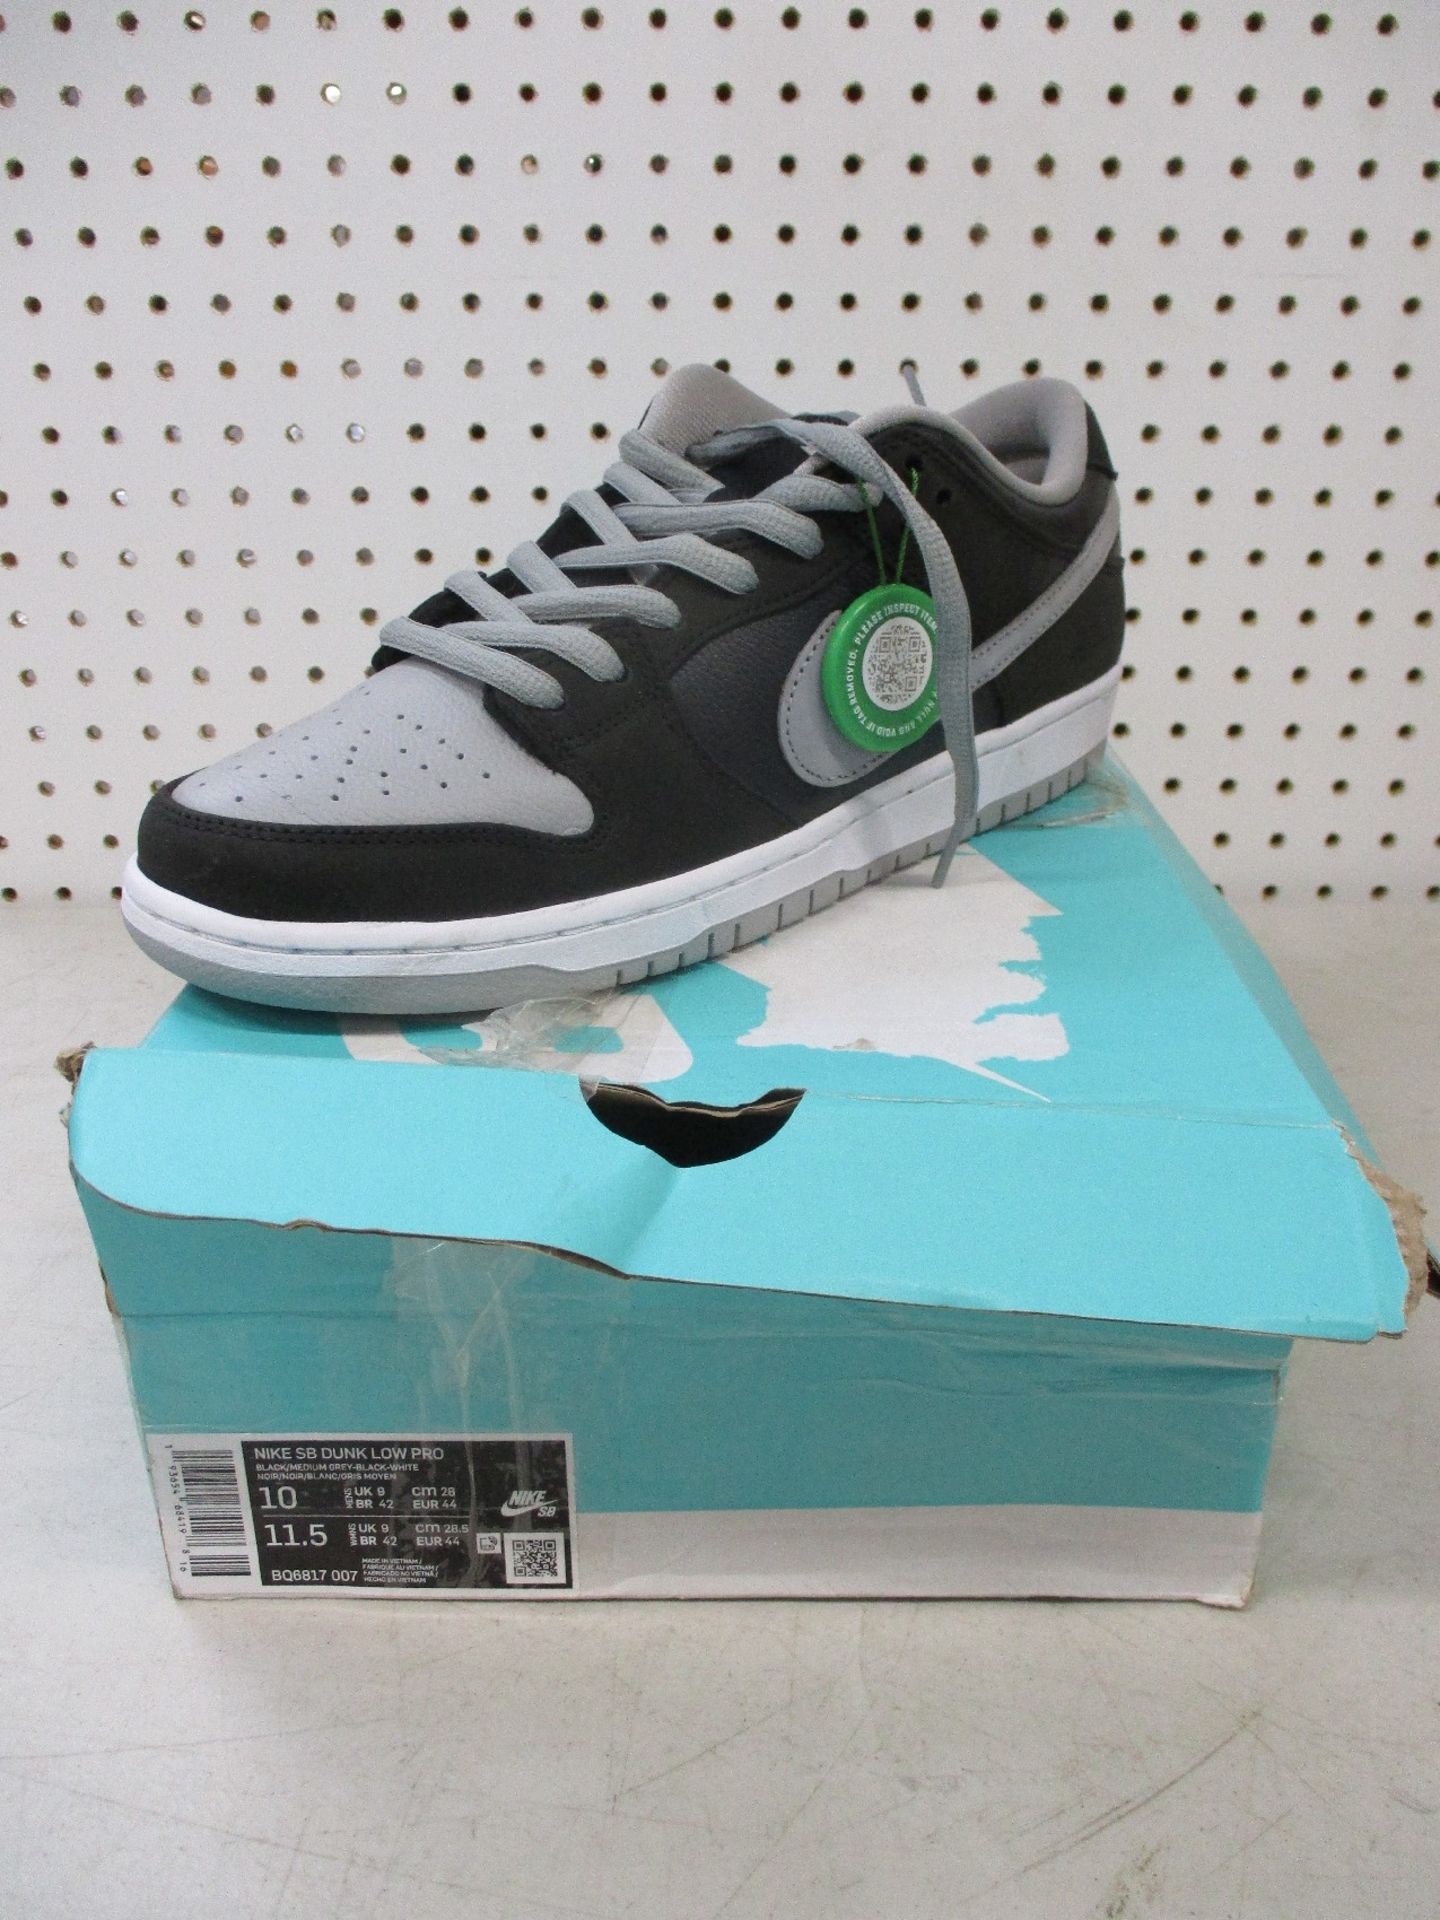 A pair of as new Nike SB Dunk Low Pro (UK 9).